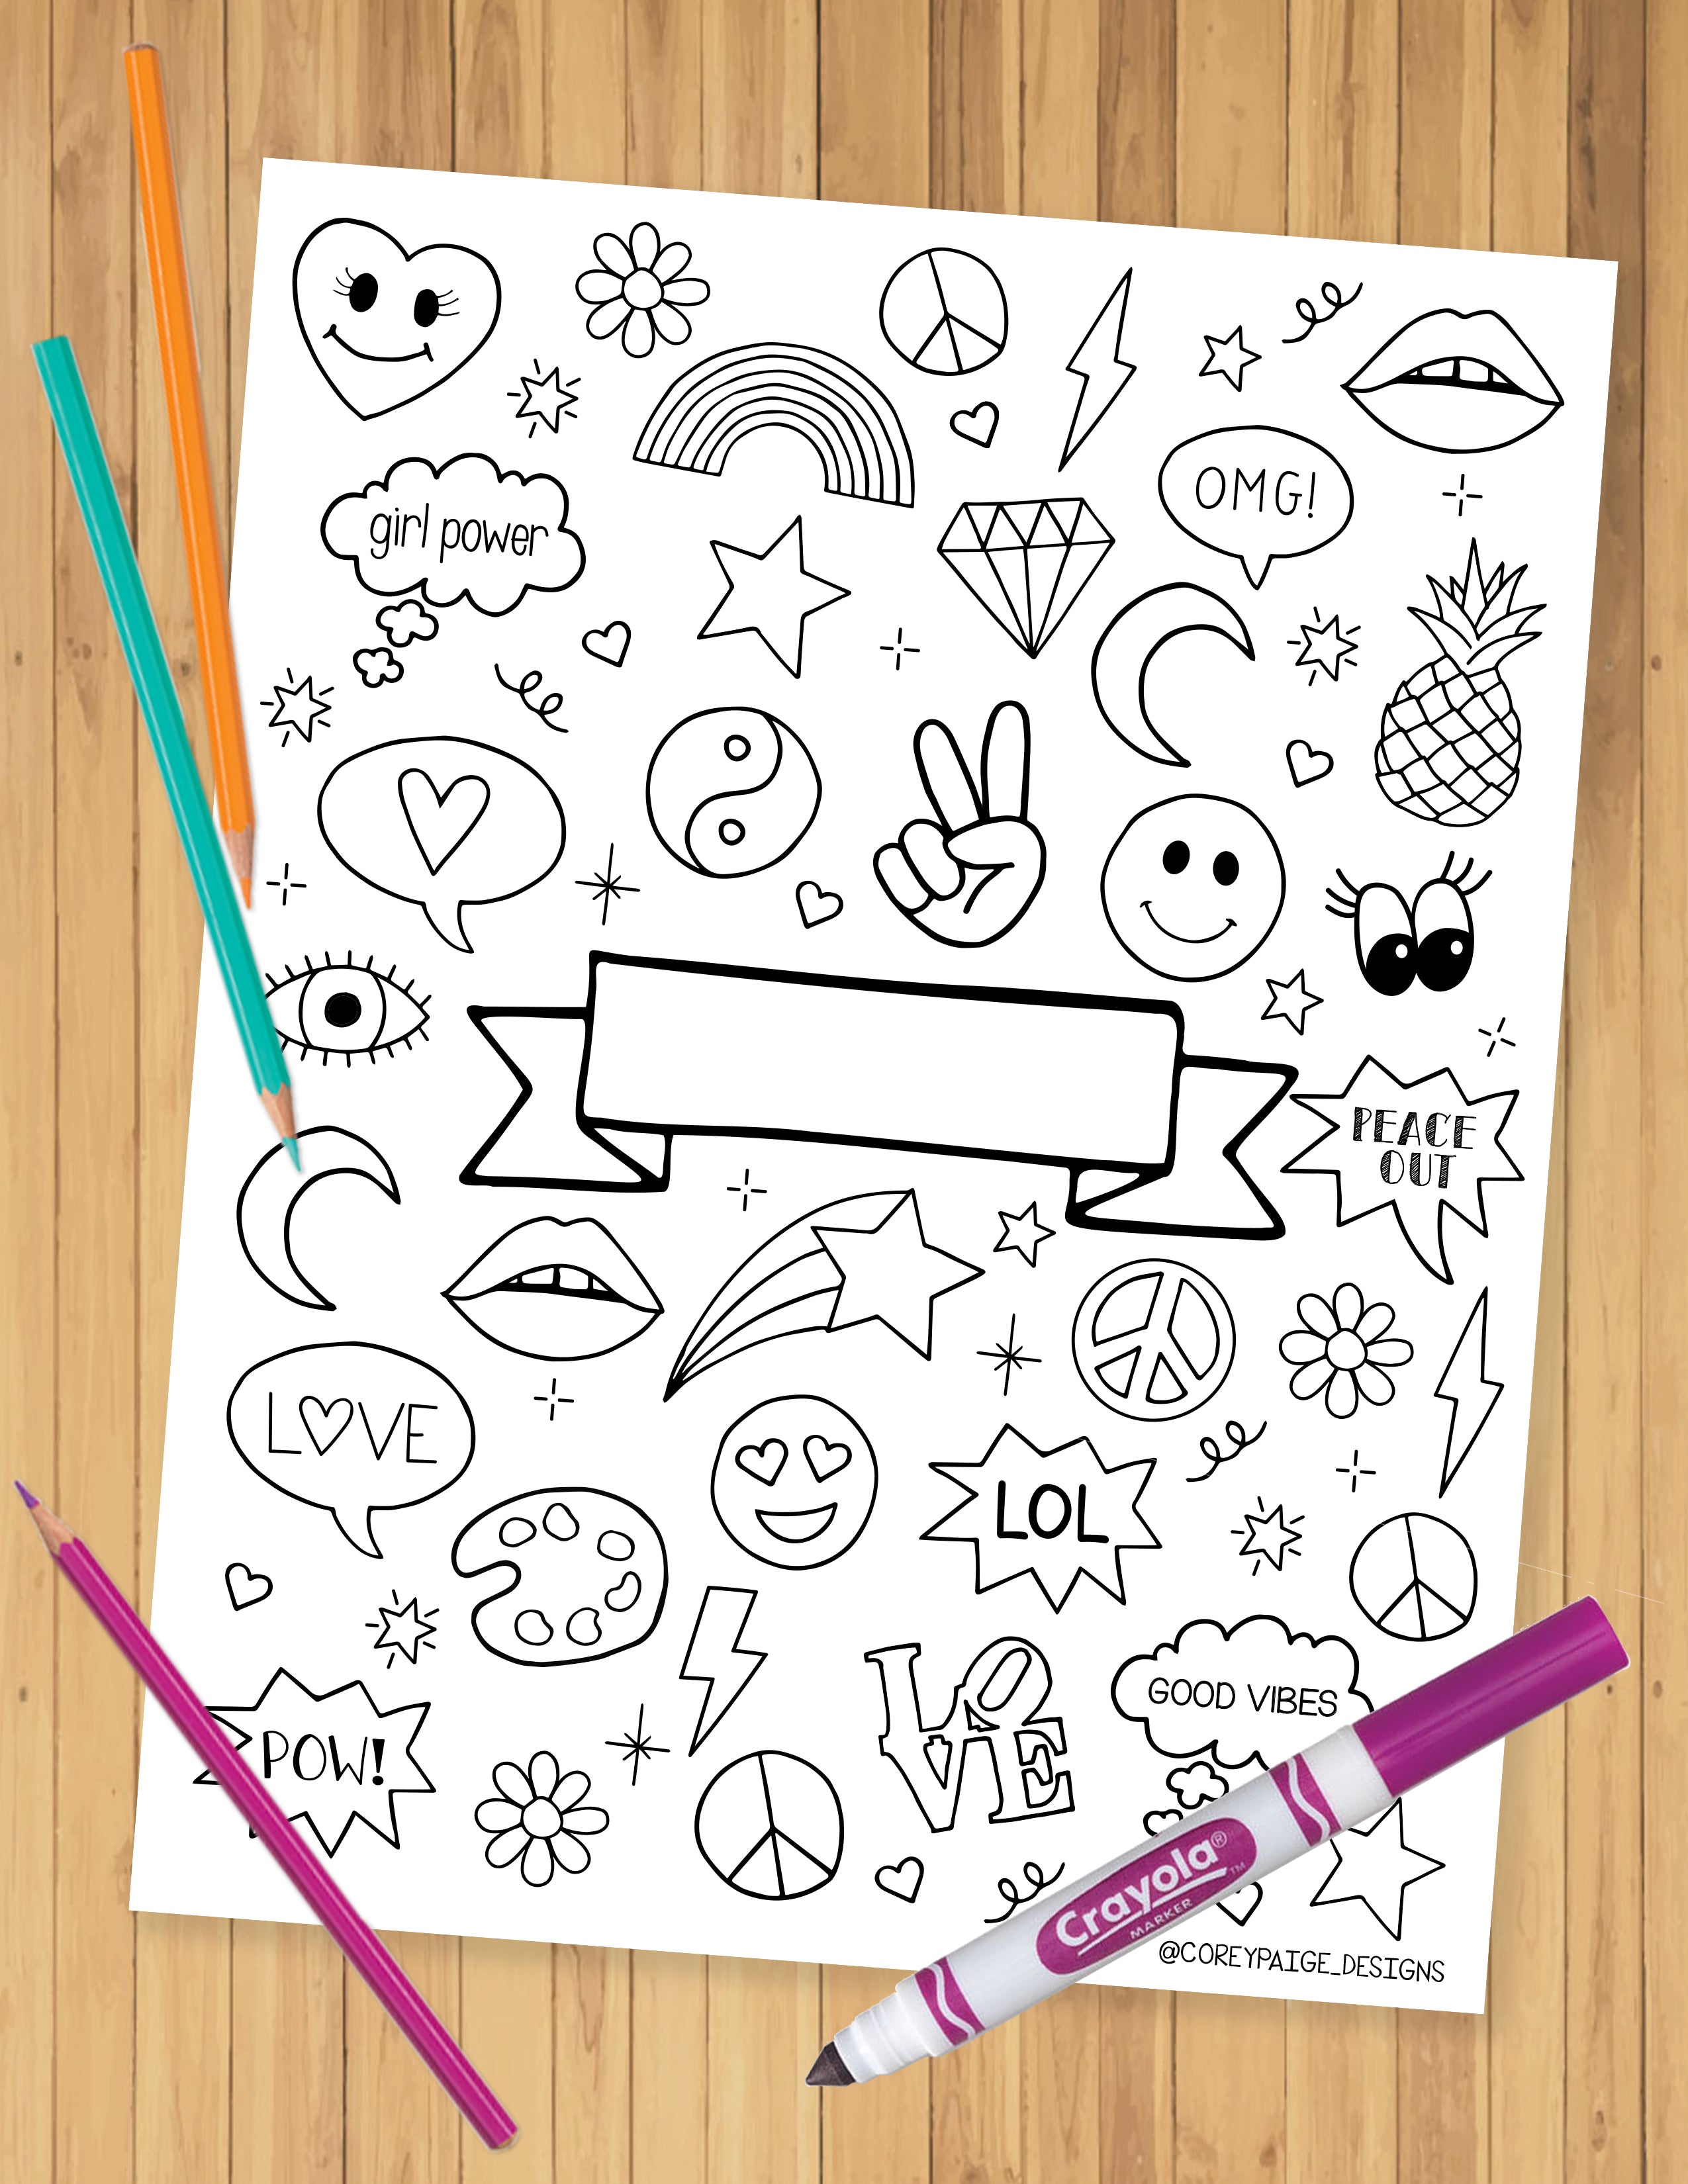 Doodle Icons Name Plate Coloring Sheet